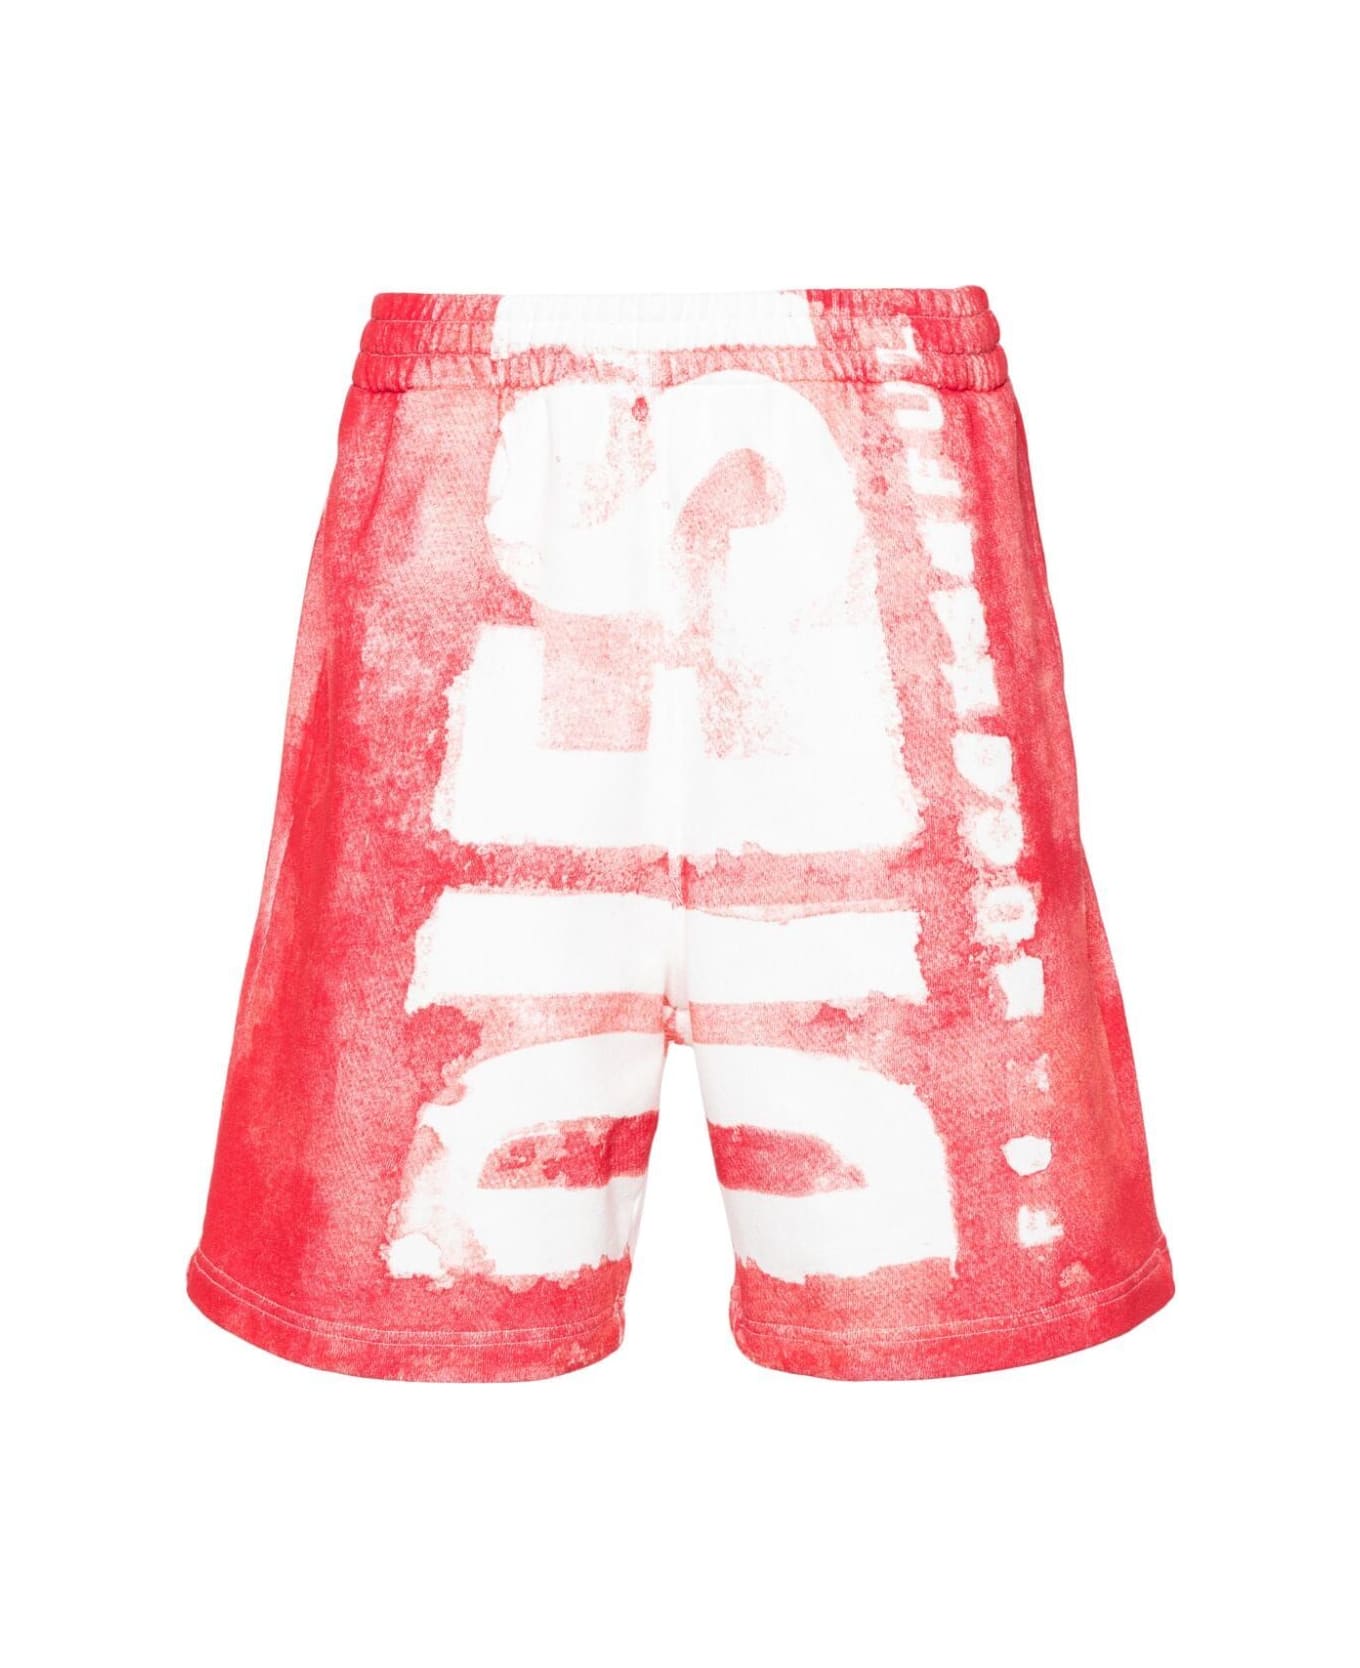 Diesel Bisc Shorts - Aa Red Multi ショートパンツ